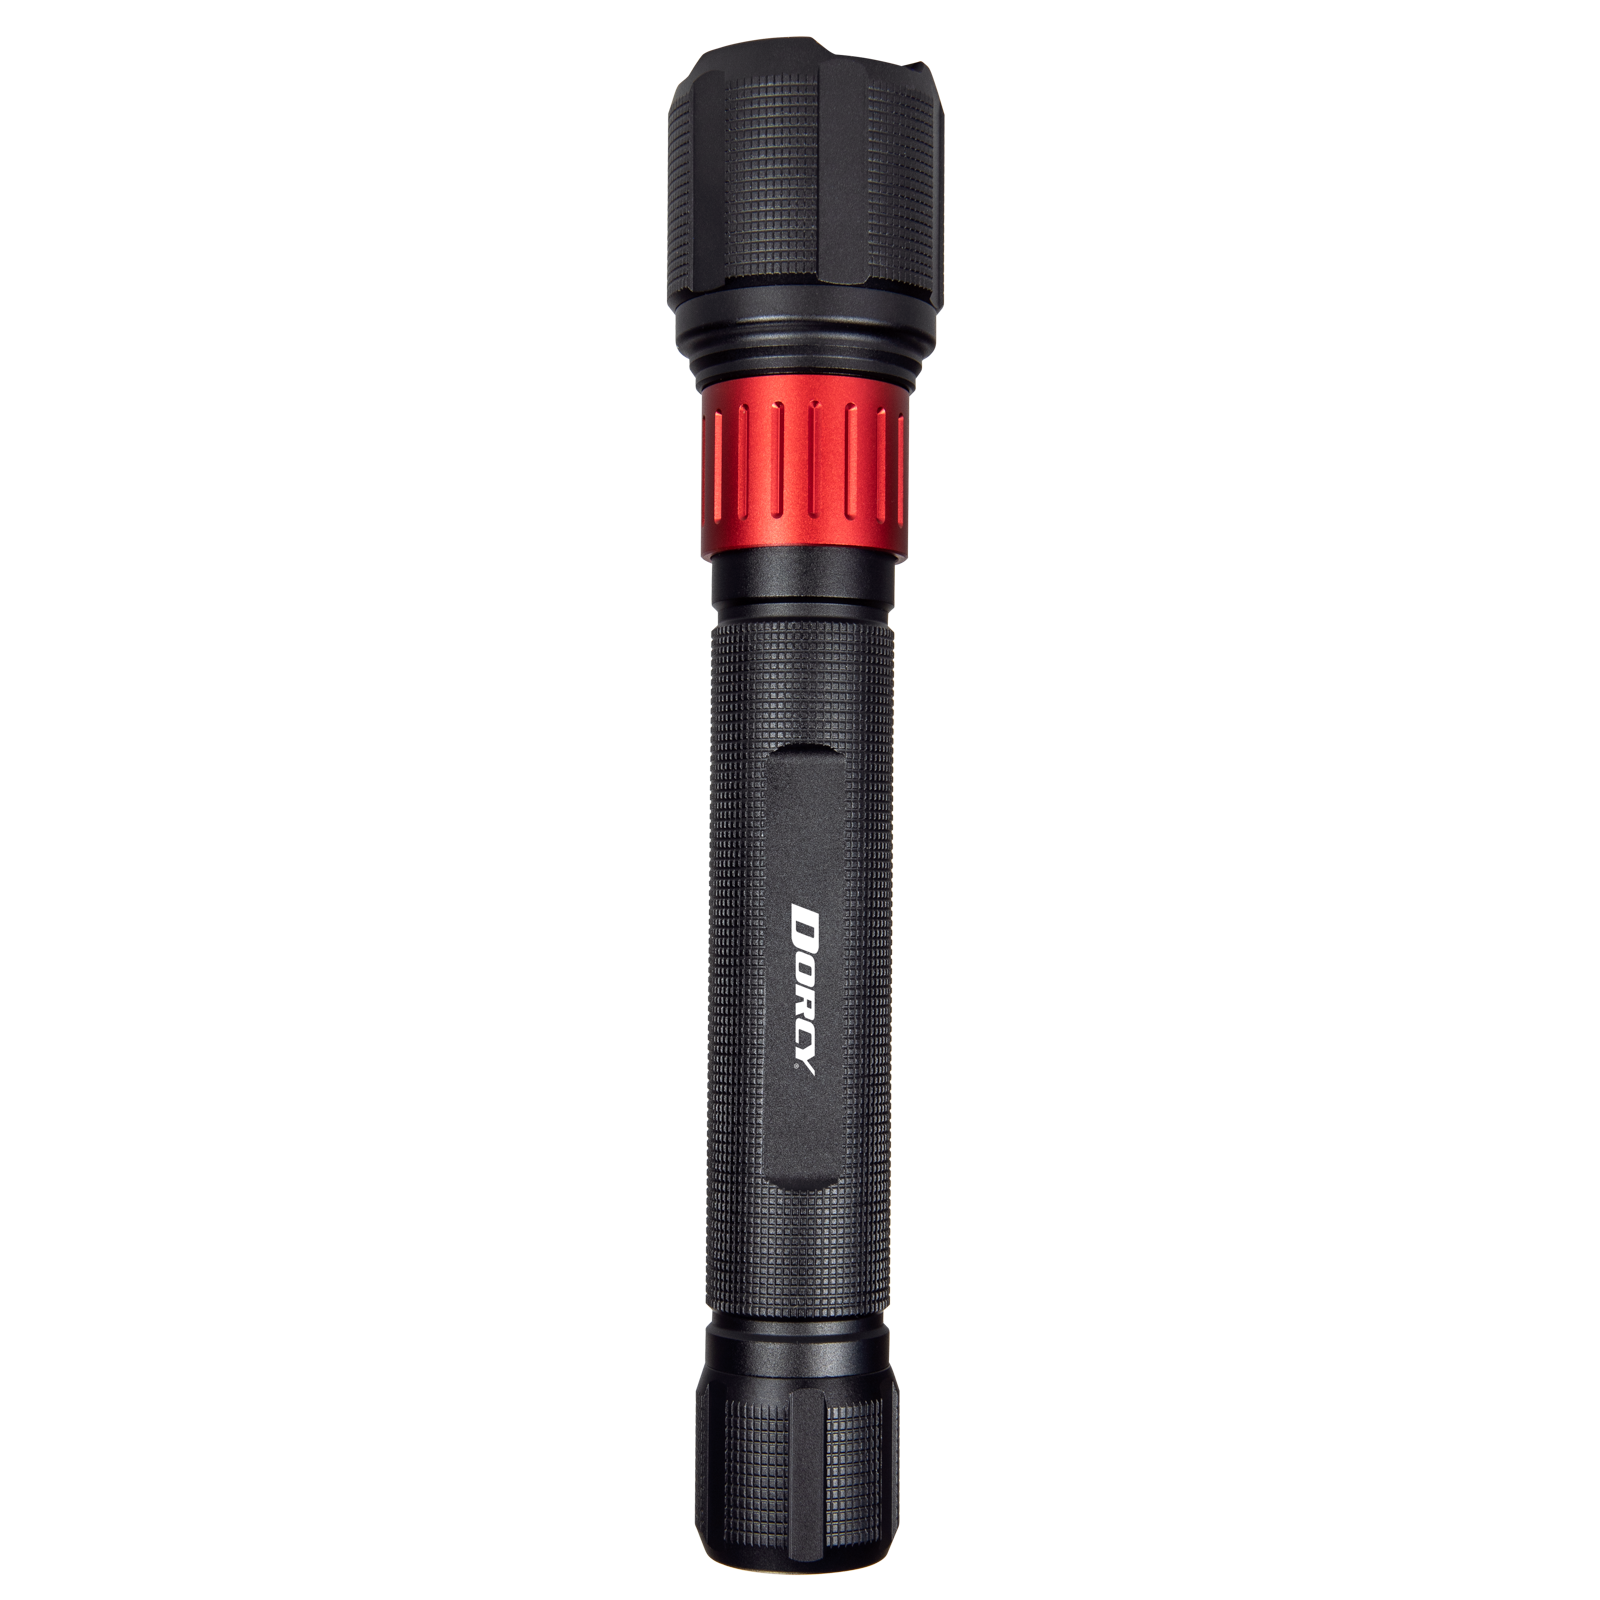 Ultra HD 2200-Lumen 4 Modes LED Rechargeable Flashlight (Lithium Ion (3.7V) Battery Included) | - Dorcy International 41-4328